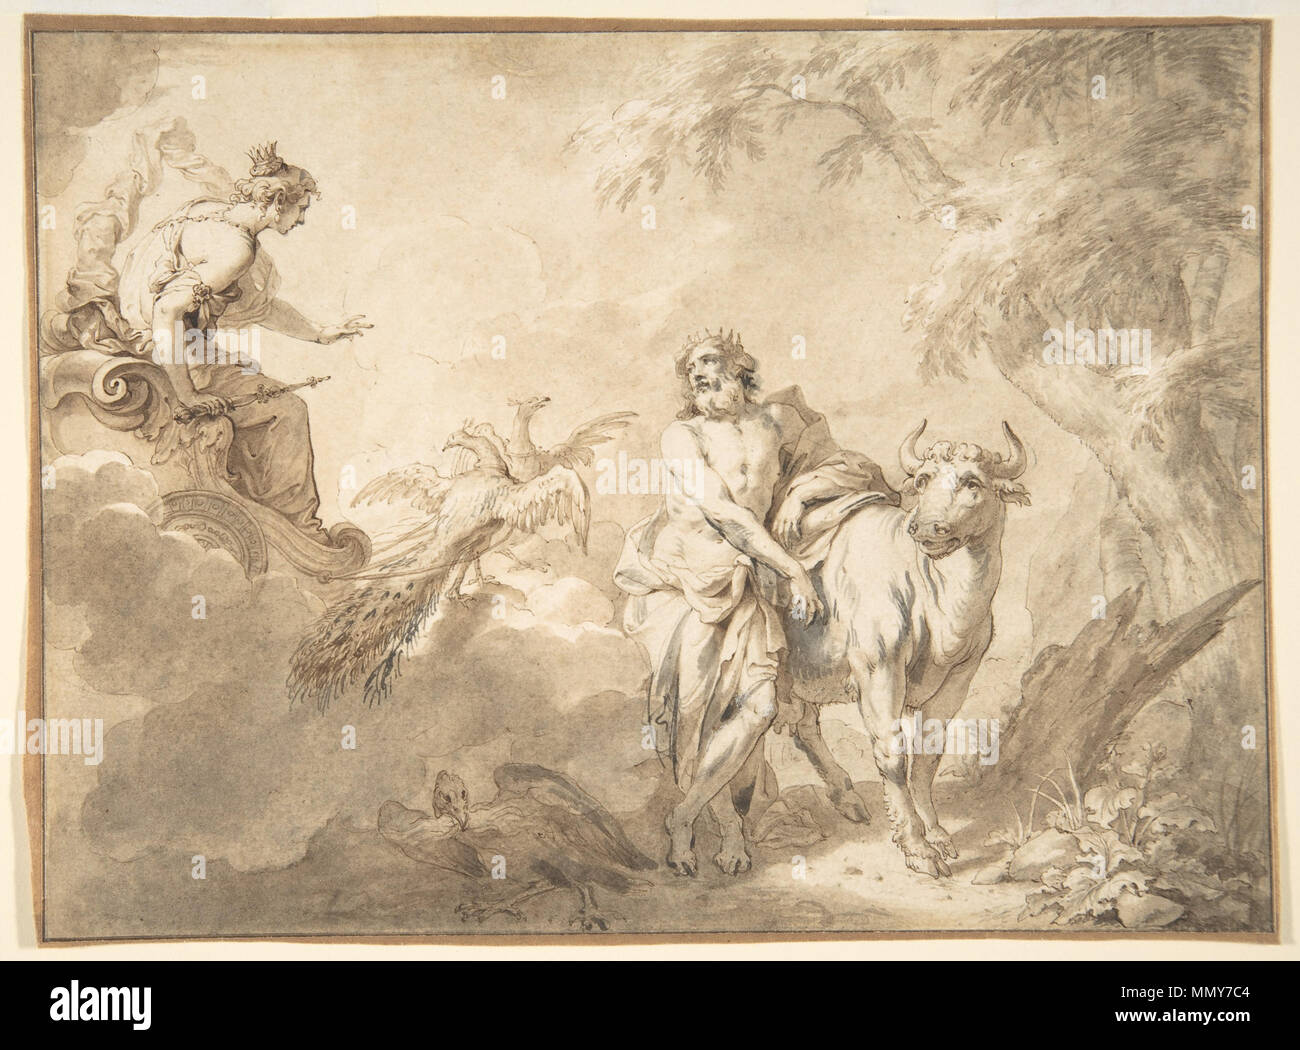 English: Illustrations to the Metamorphoses of Ovid, Jupiter and Io (1) . between 1664 and 1700. Godfried Maes - Illustrations to the Metamorphoses of Ovid, Jupiter and Io (1) Stock Photo